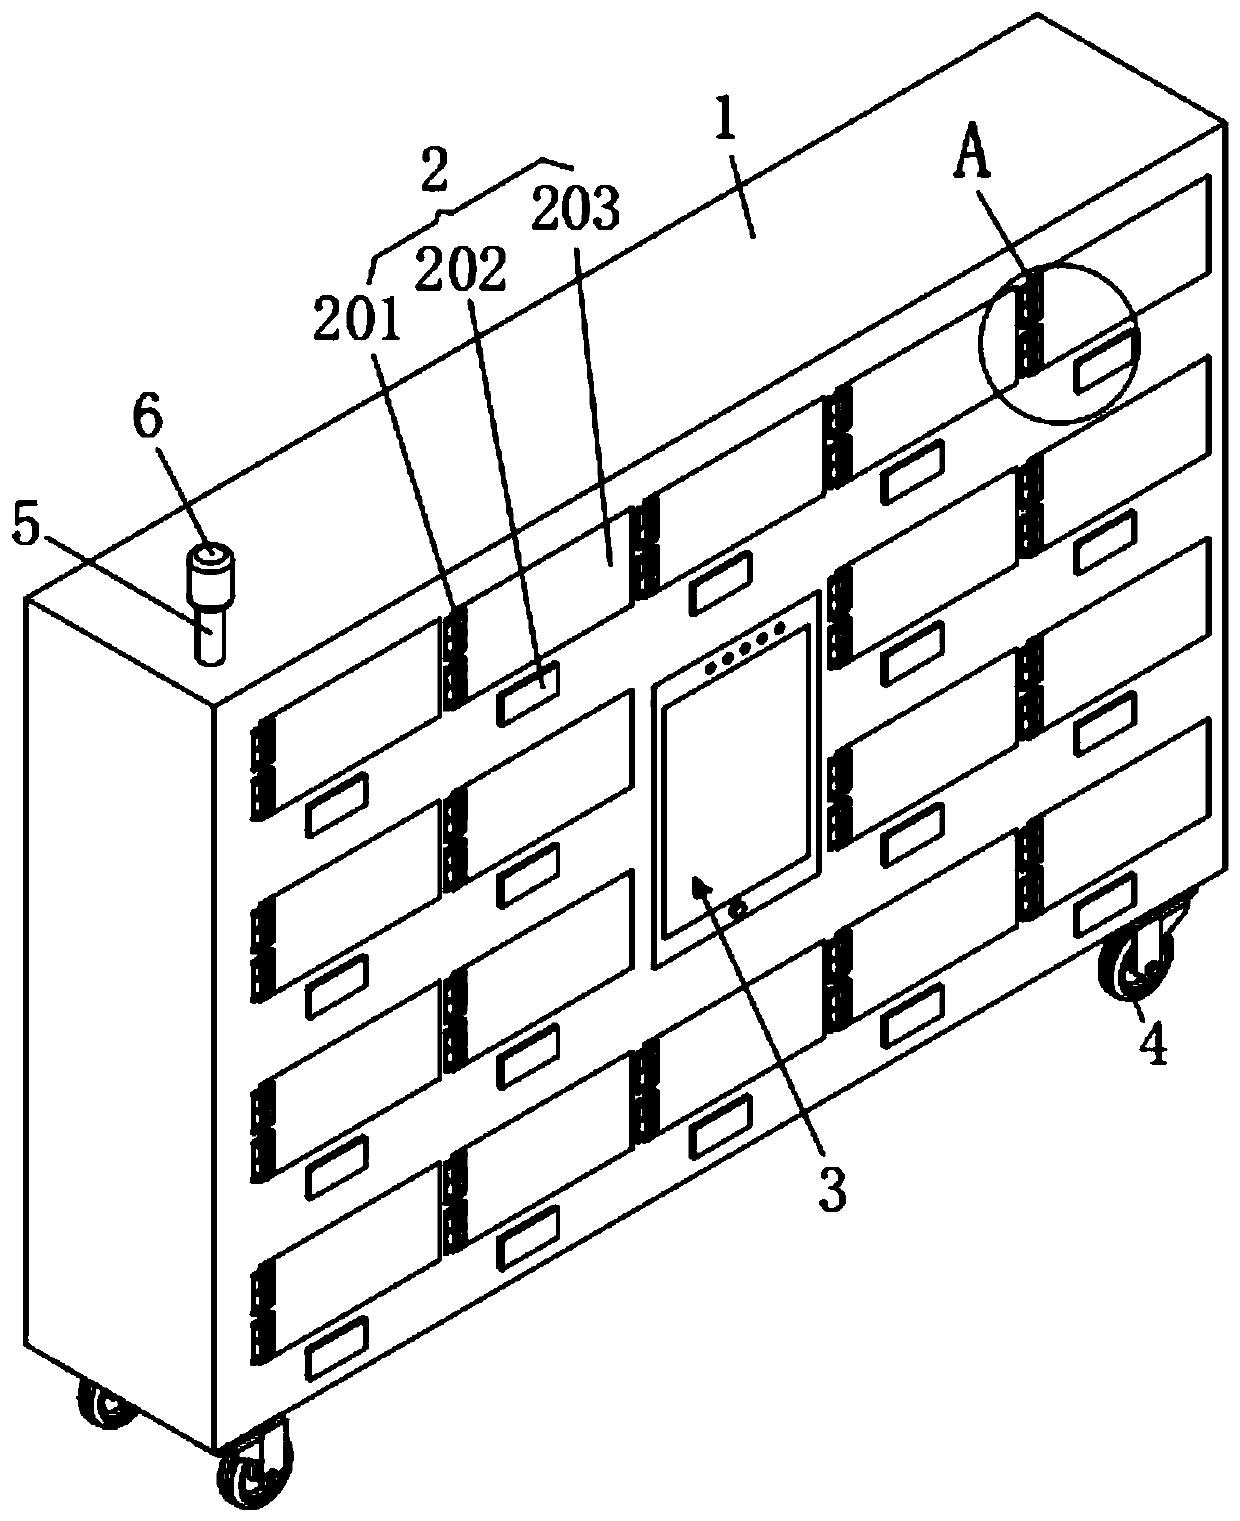 Gauze counting device and counting system